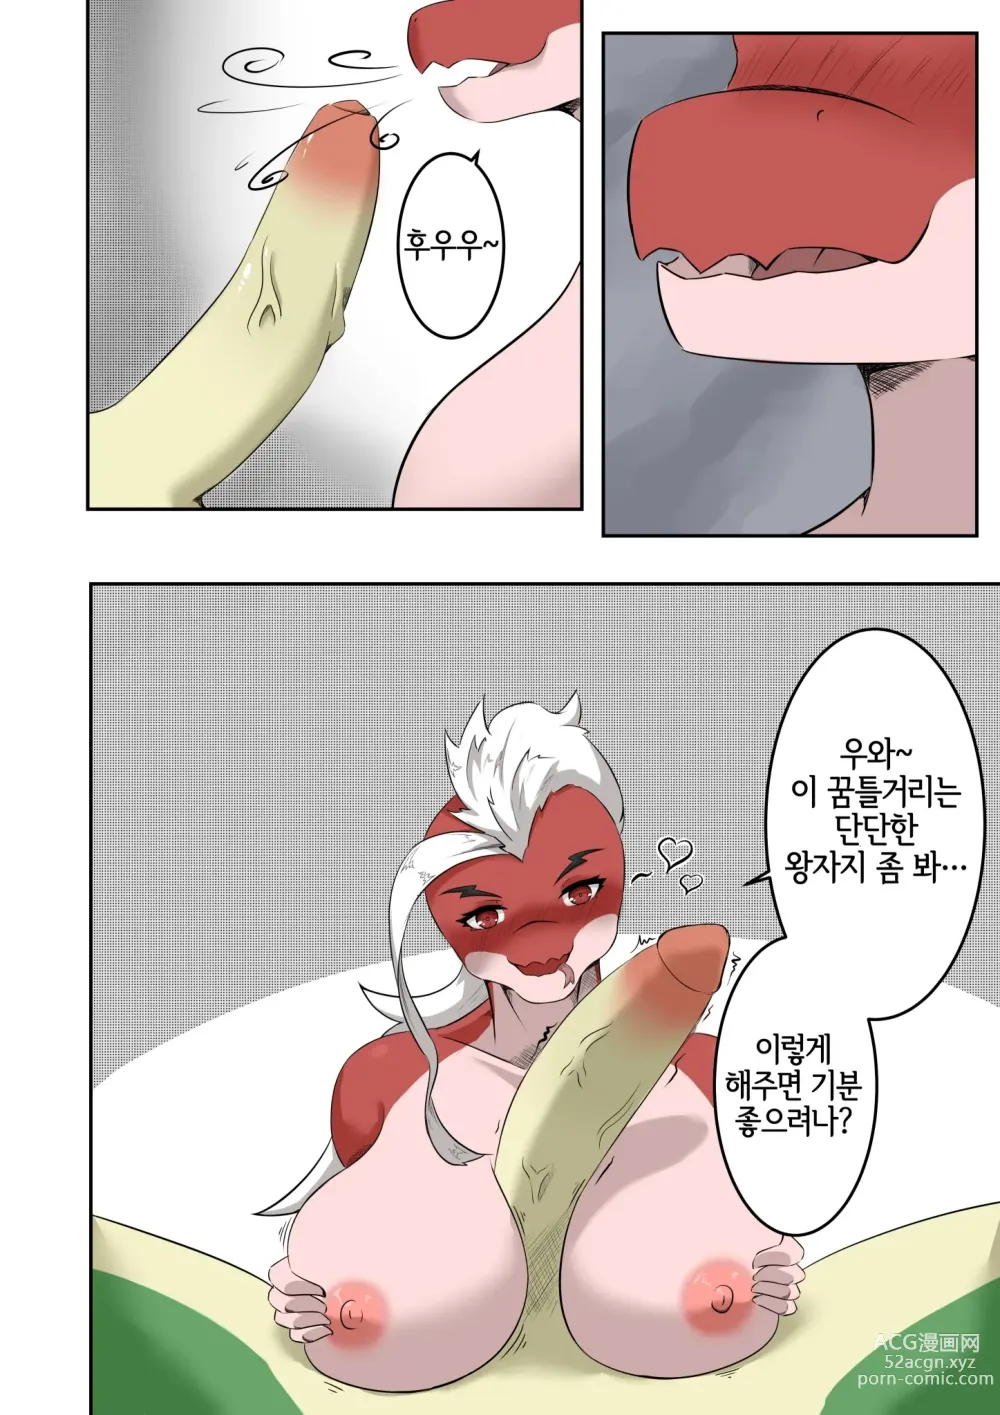 Page 6 of doujinshi Lust of Scalie